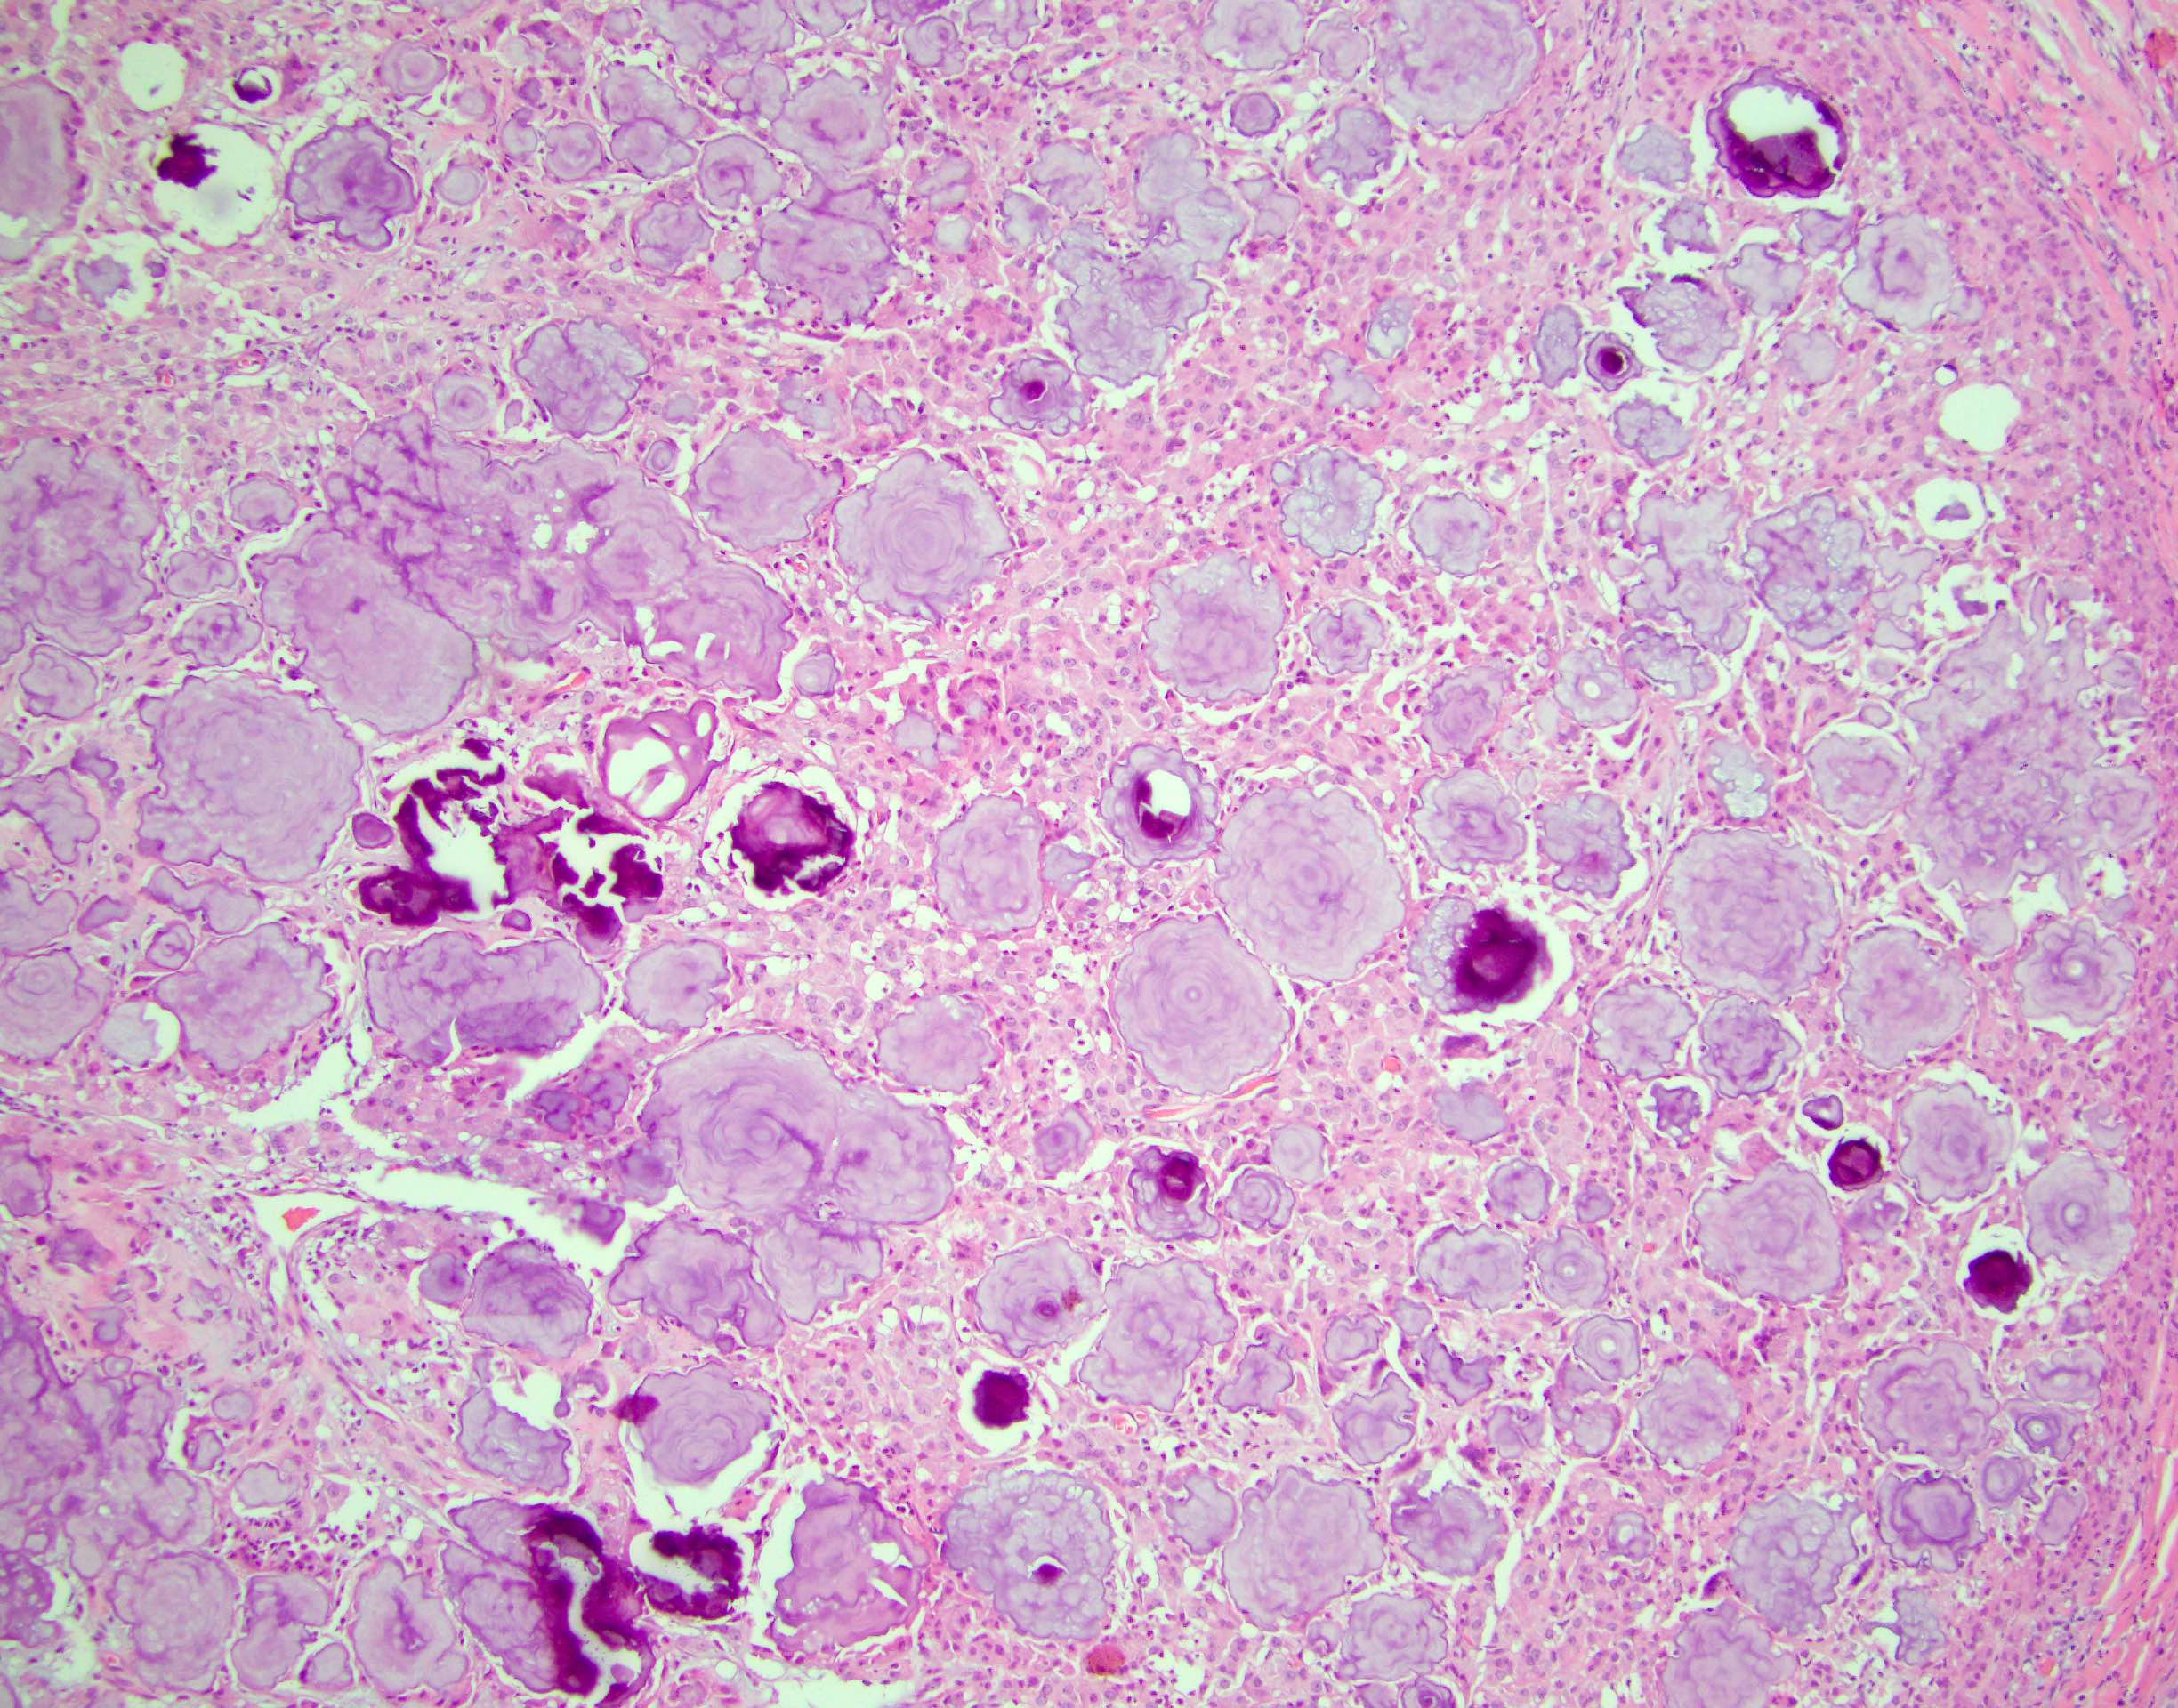 Mulberry calcifications